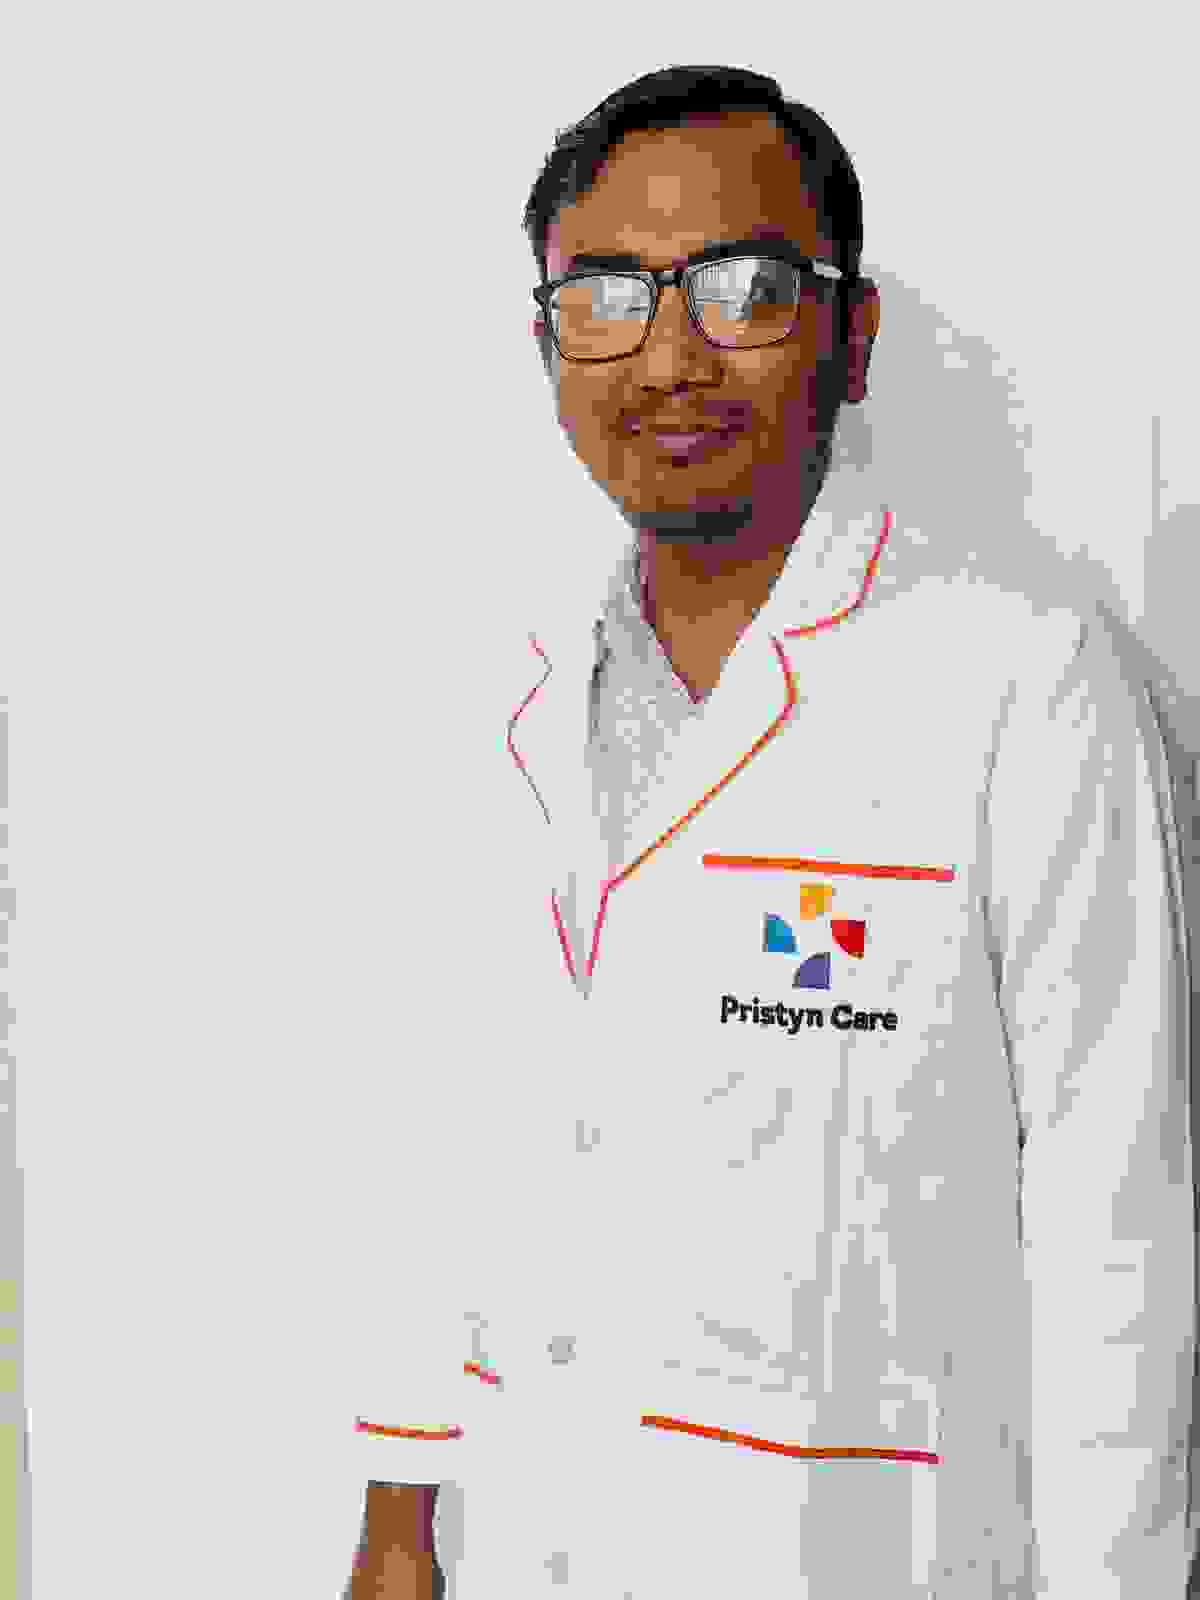 Pristyn Care : Dr. Sumit Kumar Agrawal's image